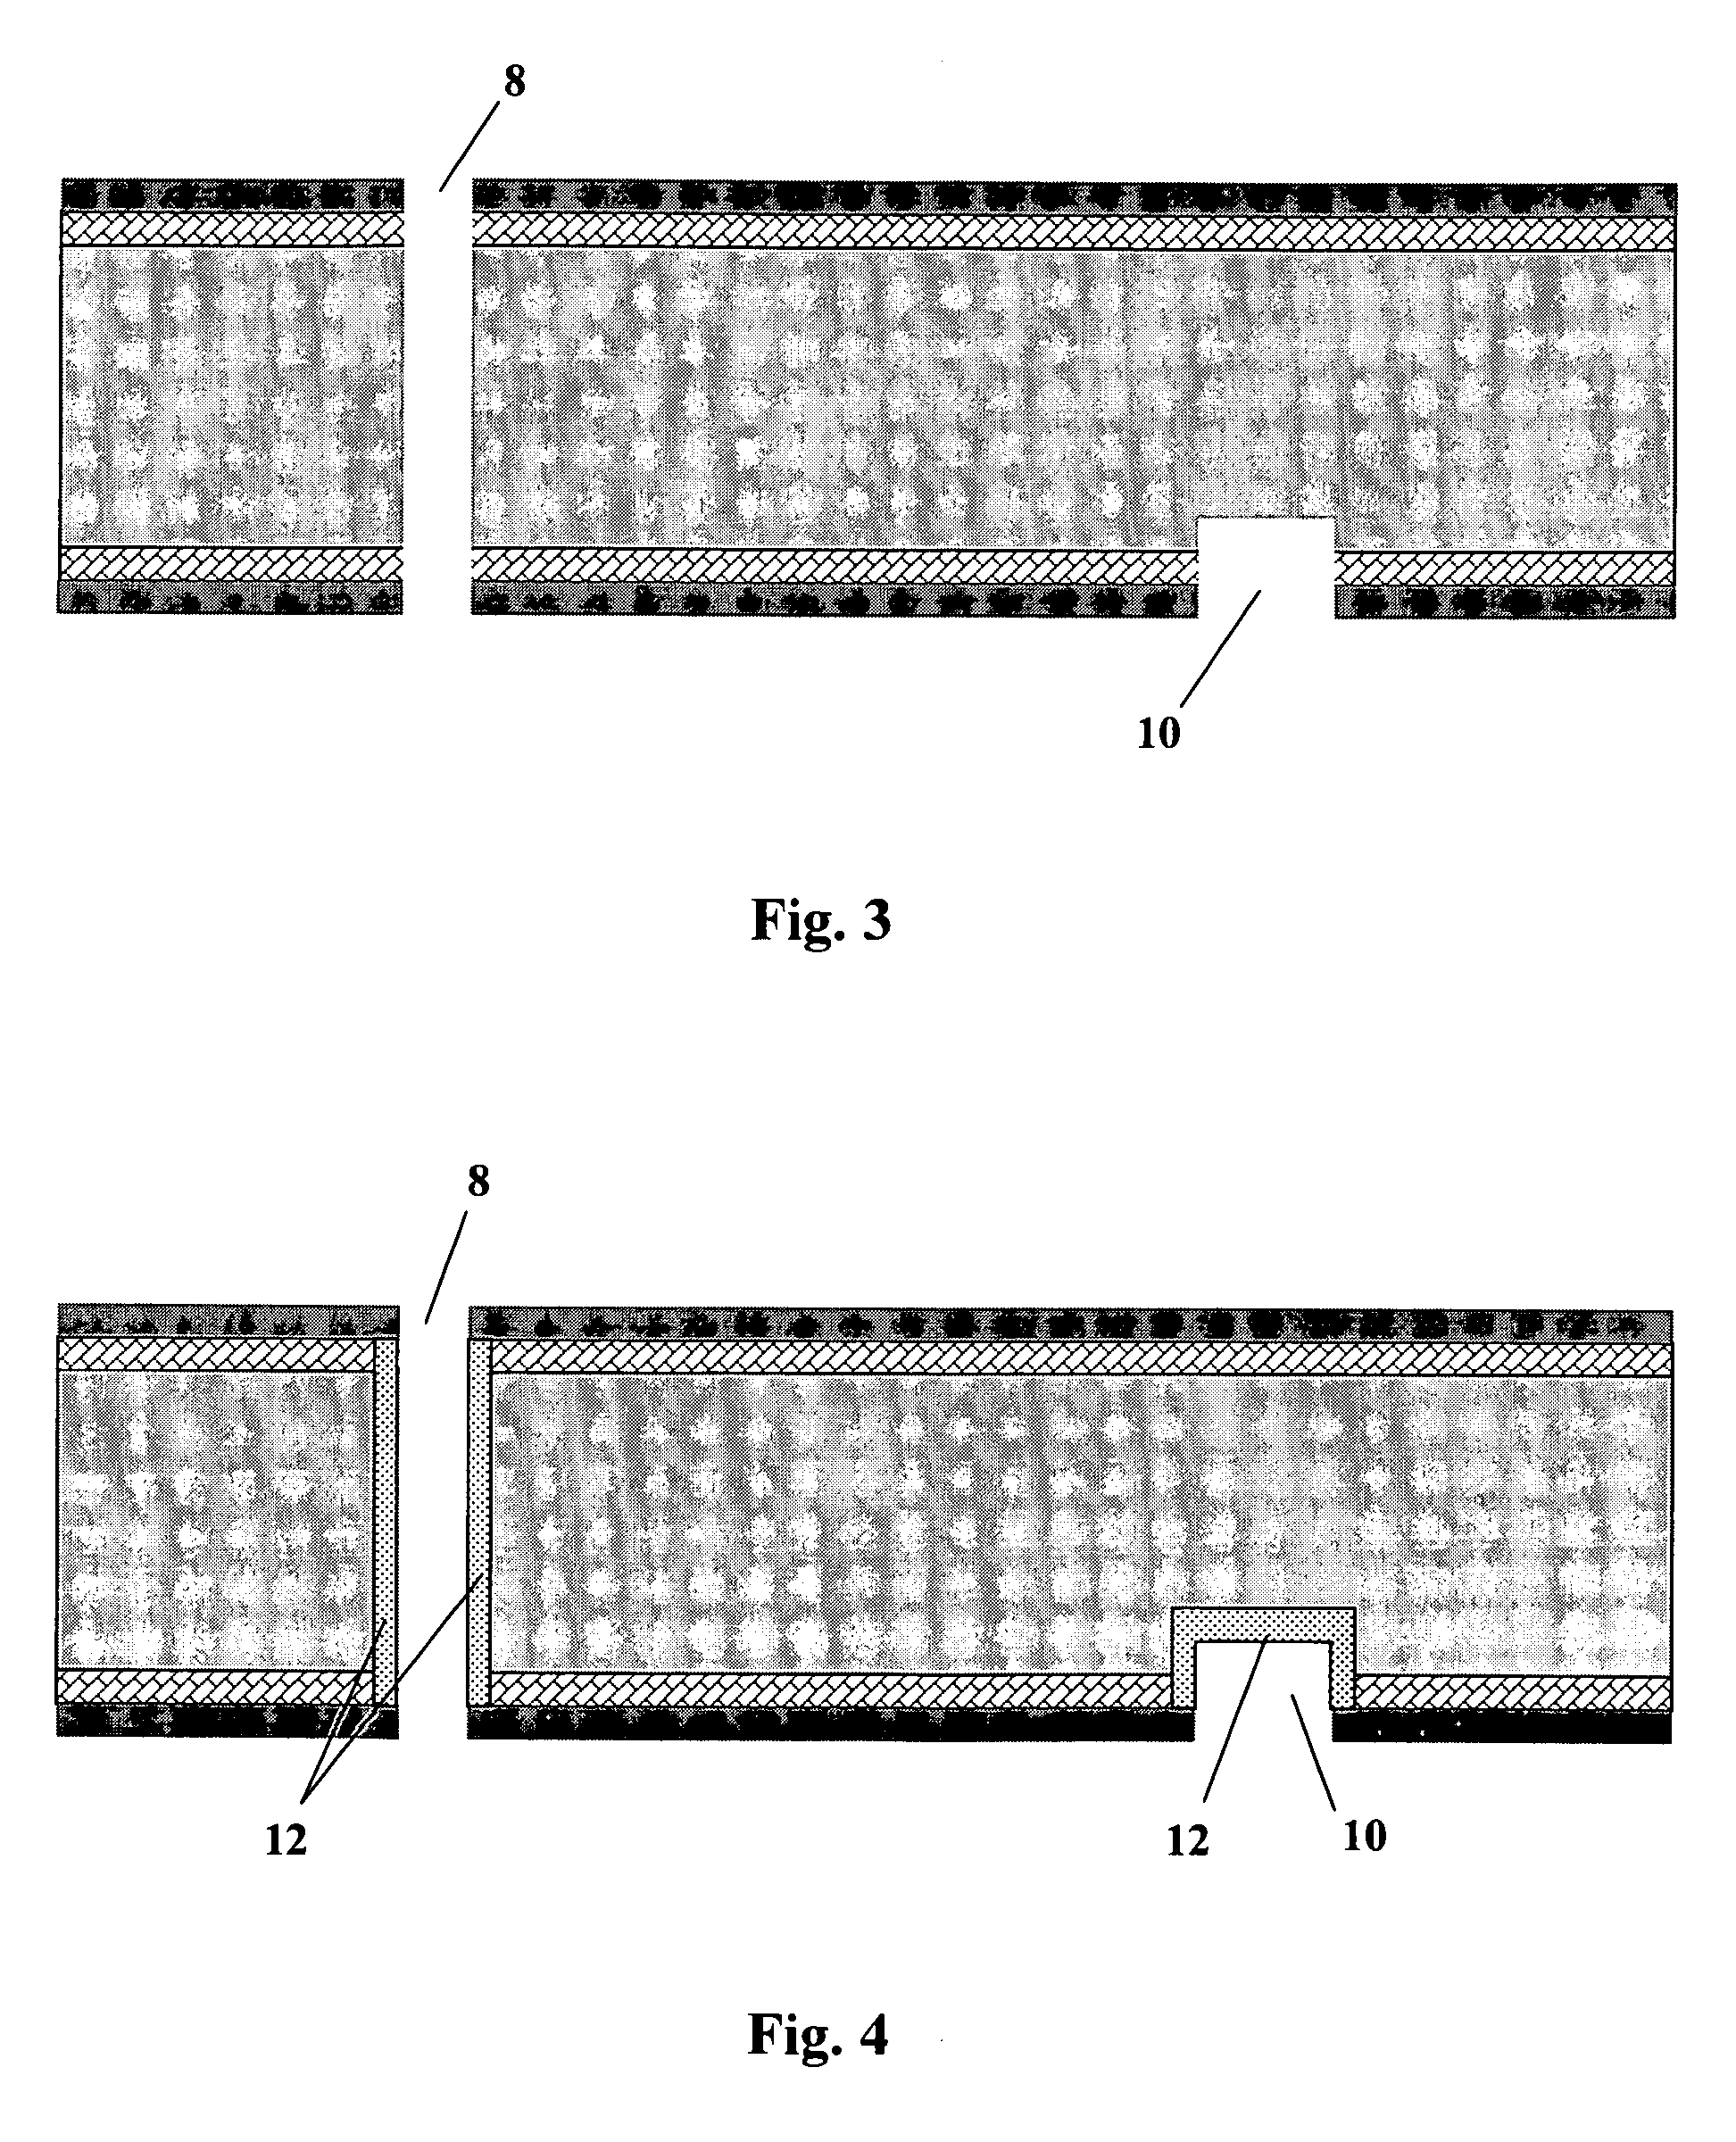 Process and fabrication methods for emitter wrap through back contact solar cells